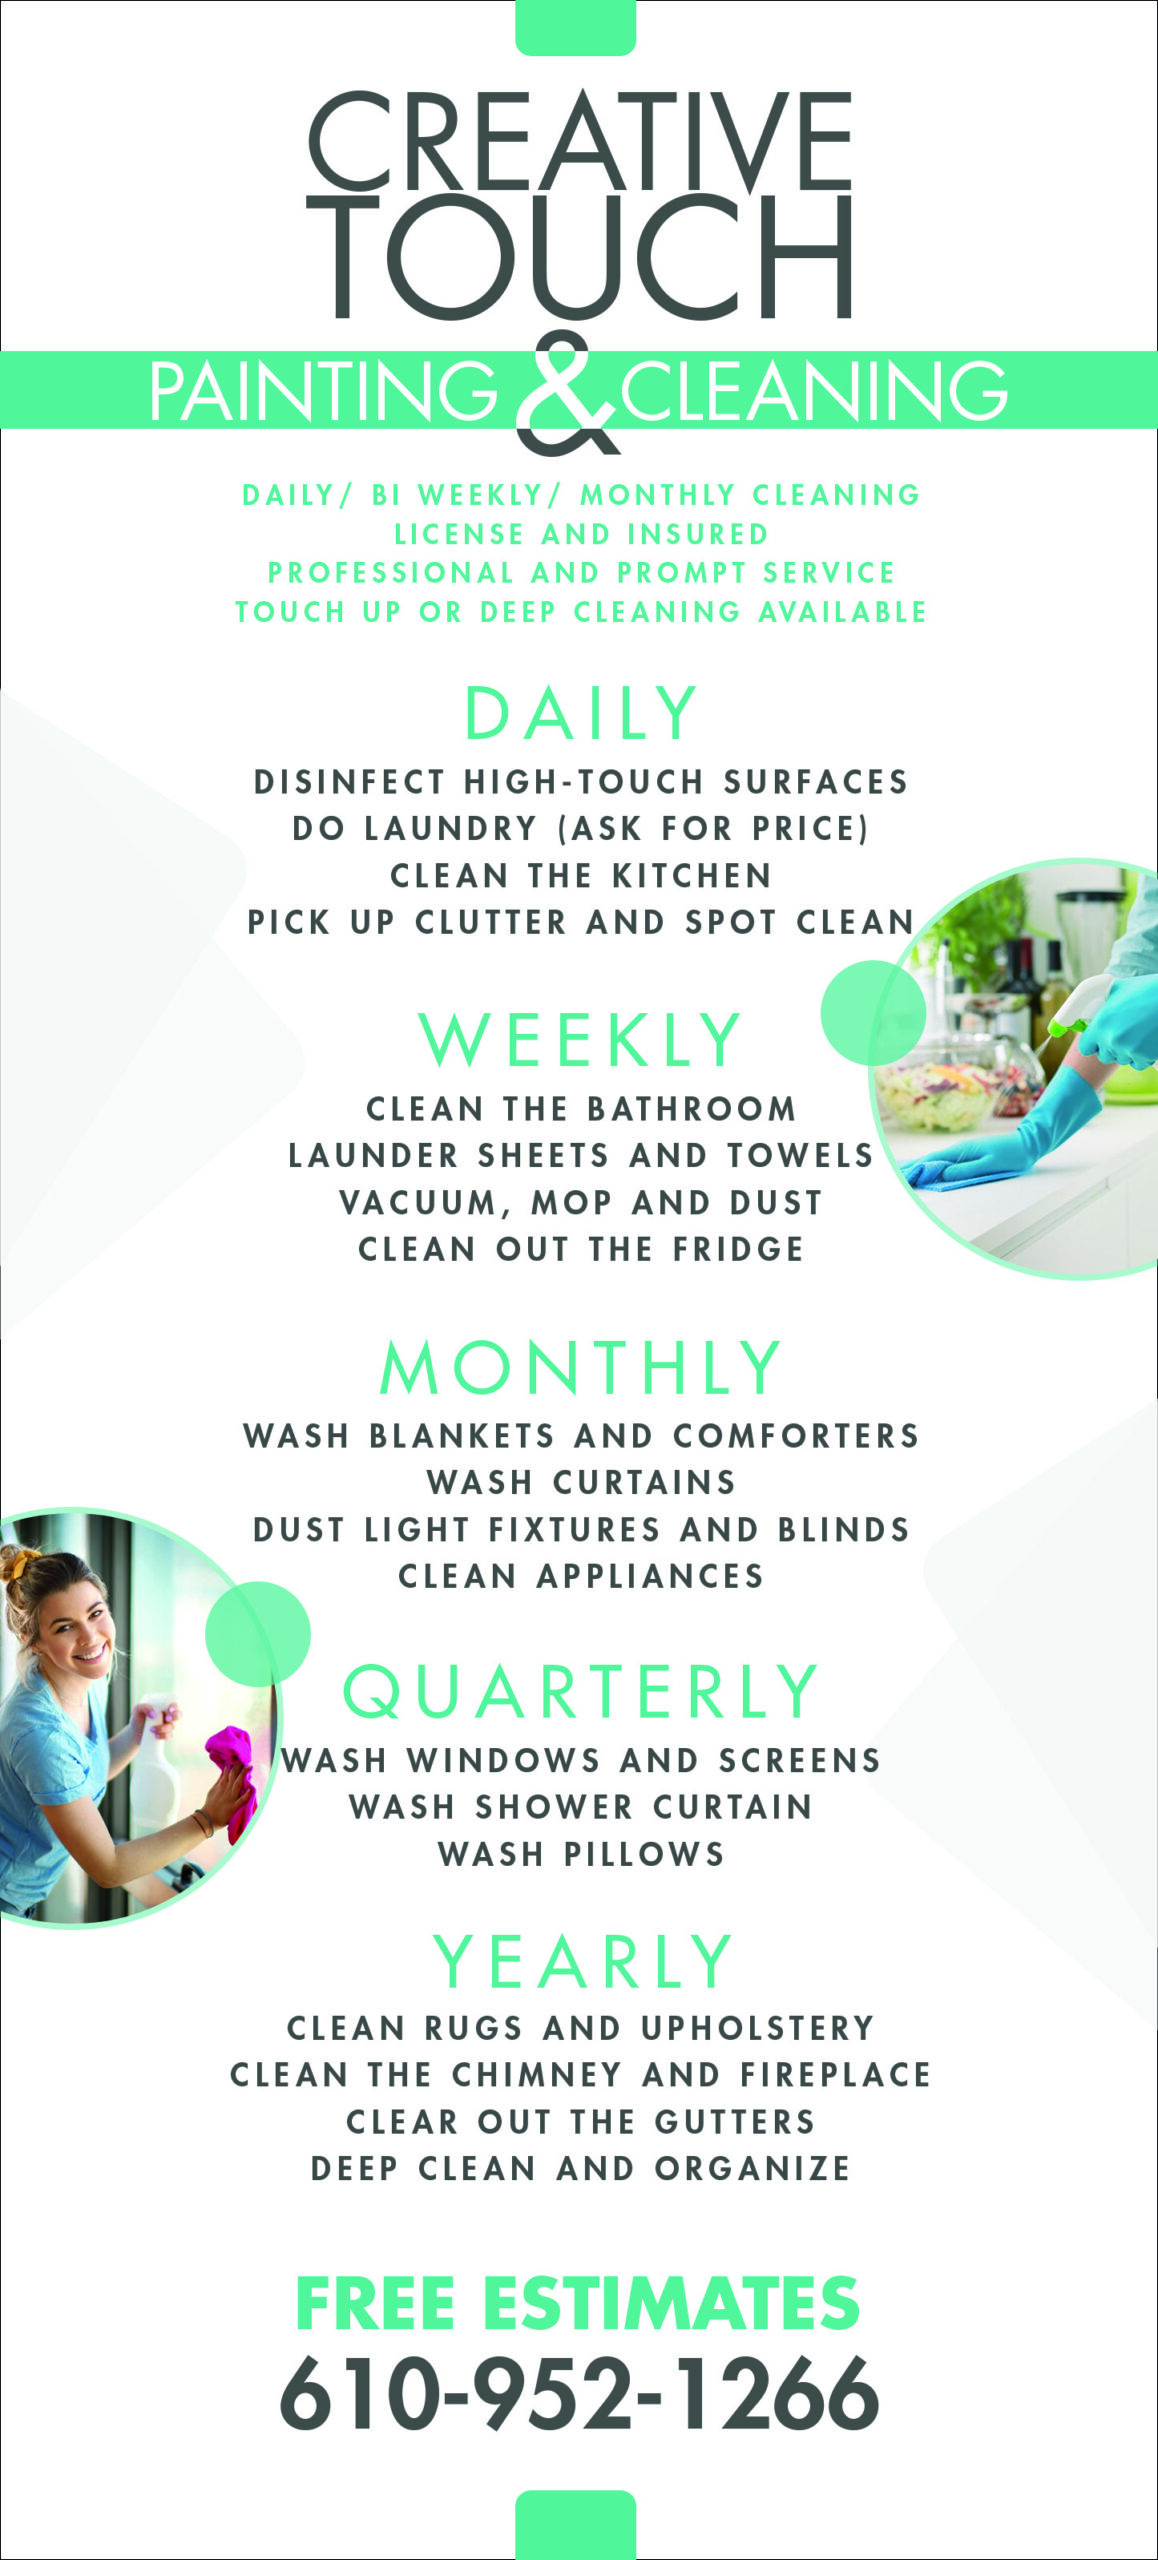 flyer design for Creative Touch Paint & Cleaning